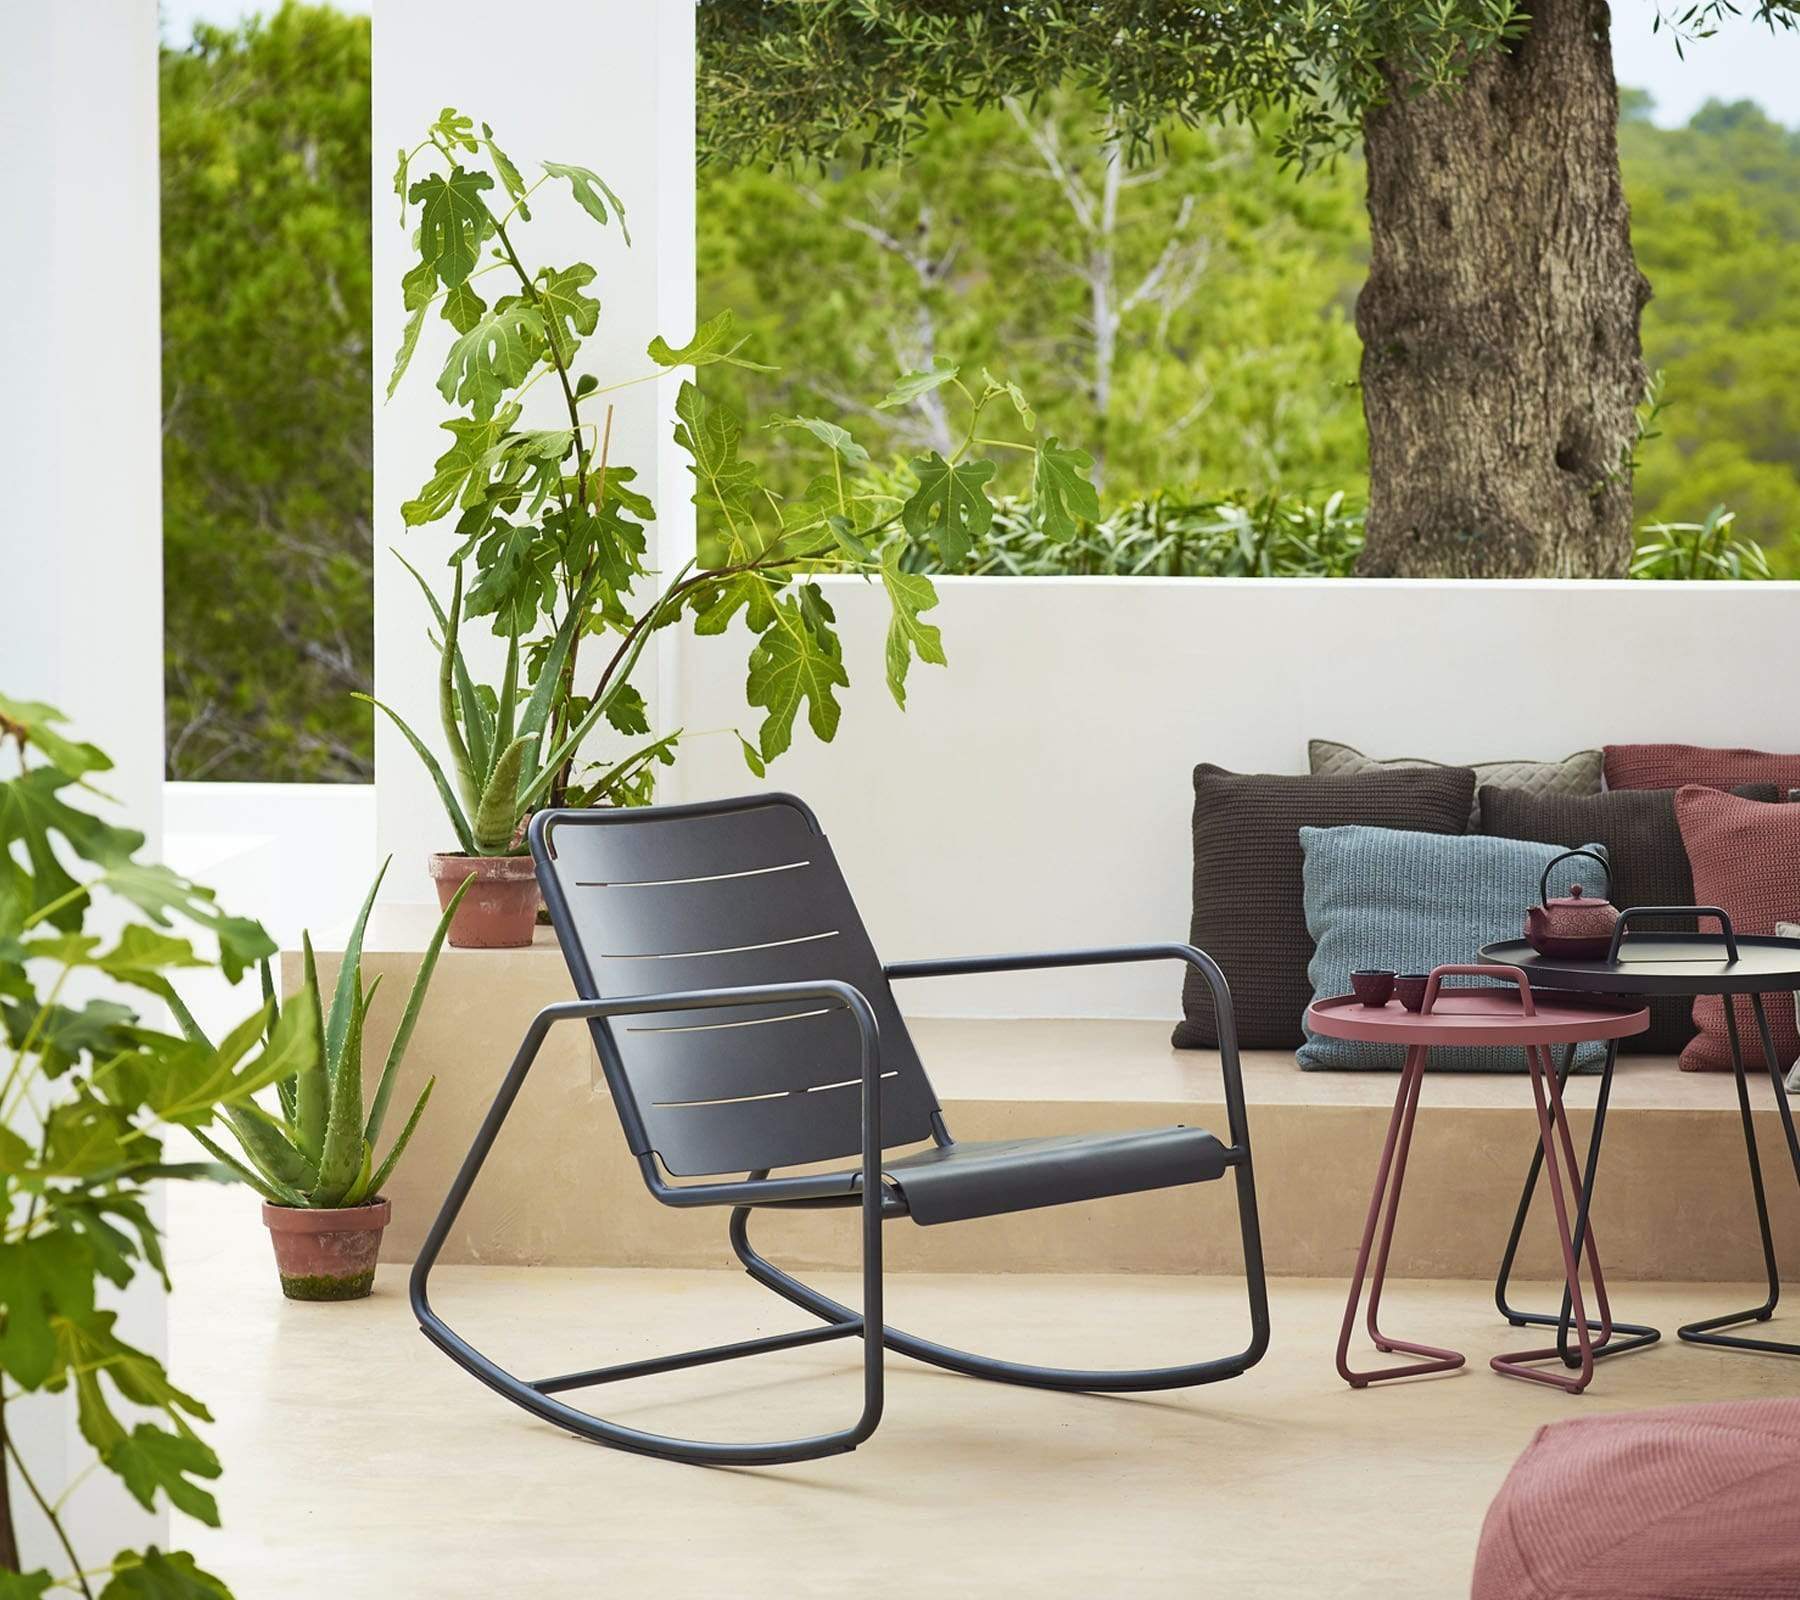 Boxhill's Copenhagen Rocking Chair lifestyle image with side tables and pillows at patio